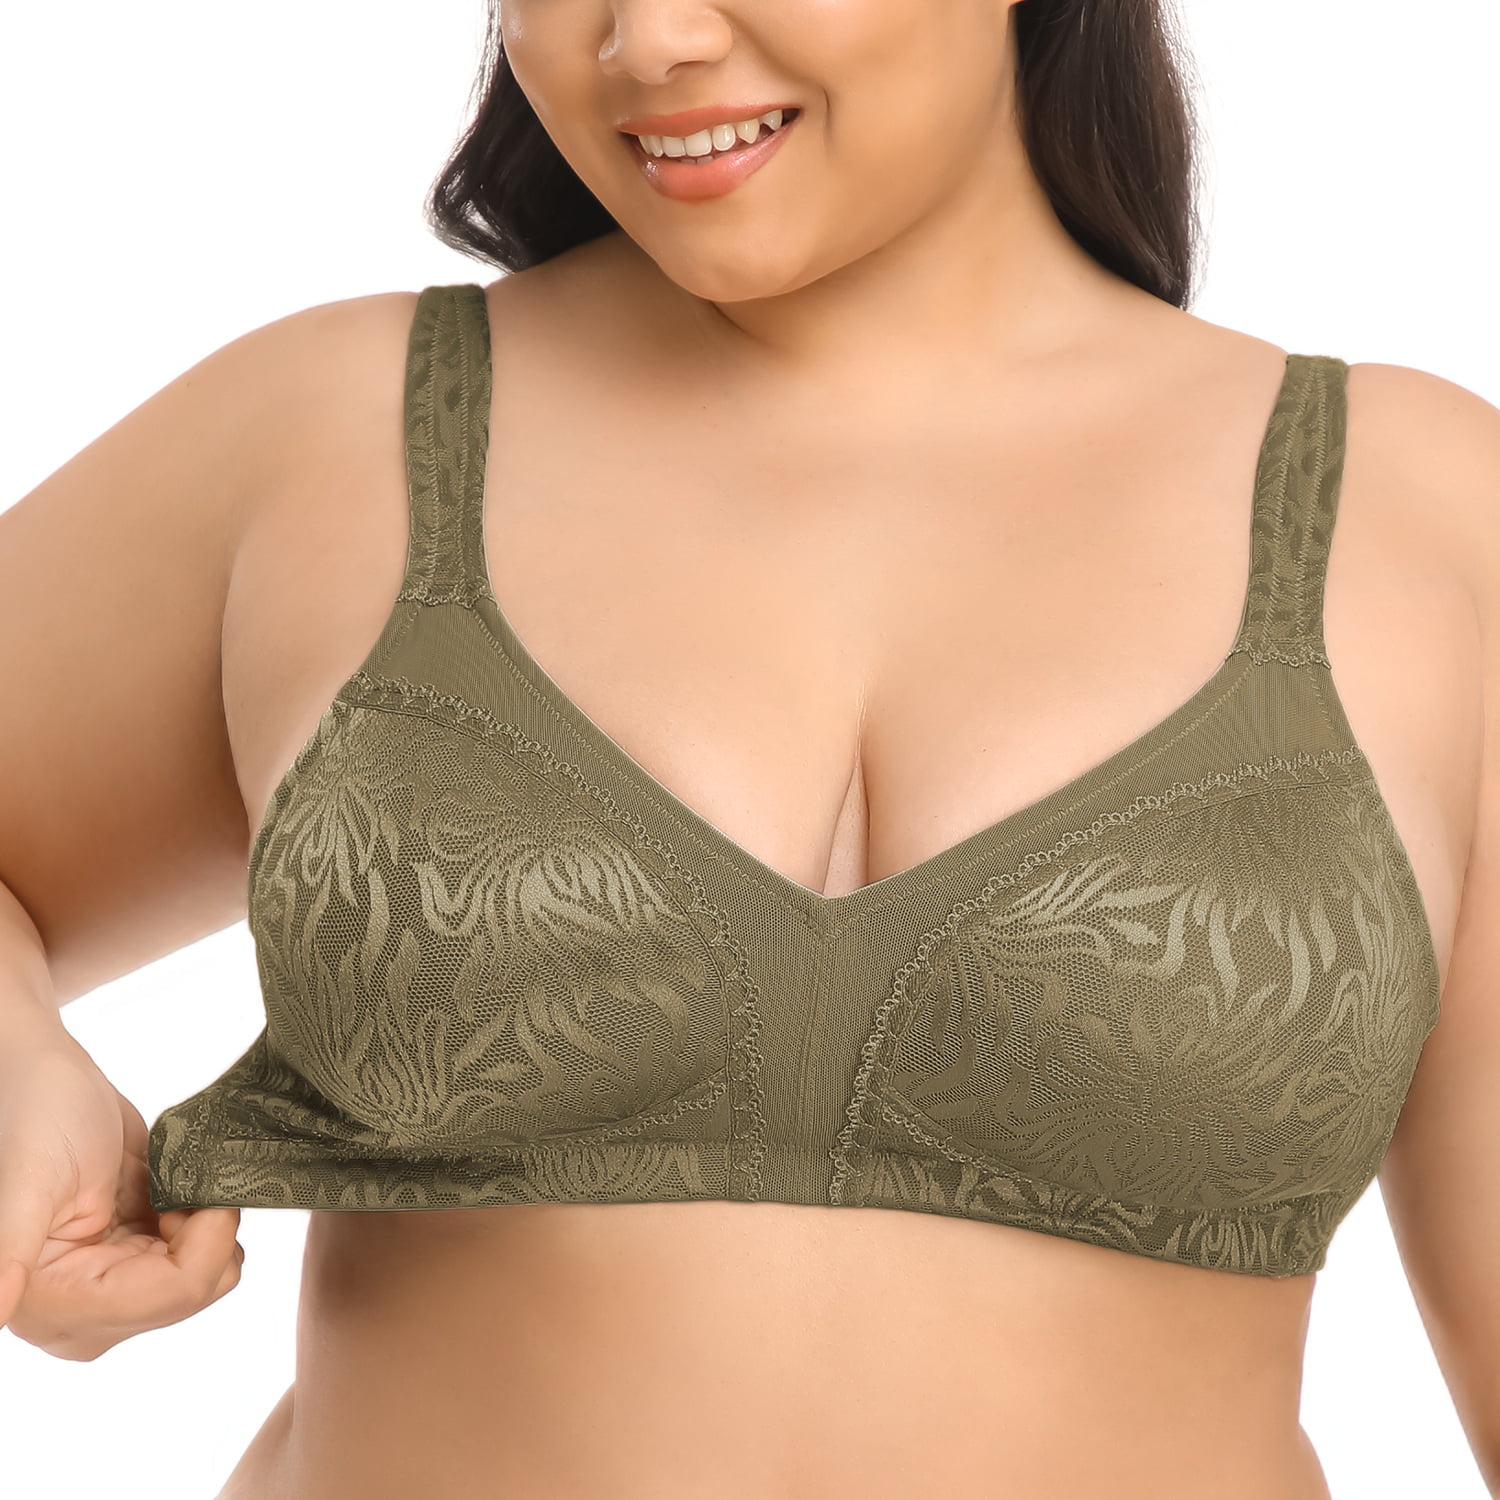  Womens Plus Size Bras Minimizer Underwire Full Coverage  Unlined Seamless Cup Oatmeal Heather 40F